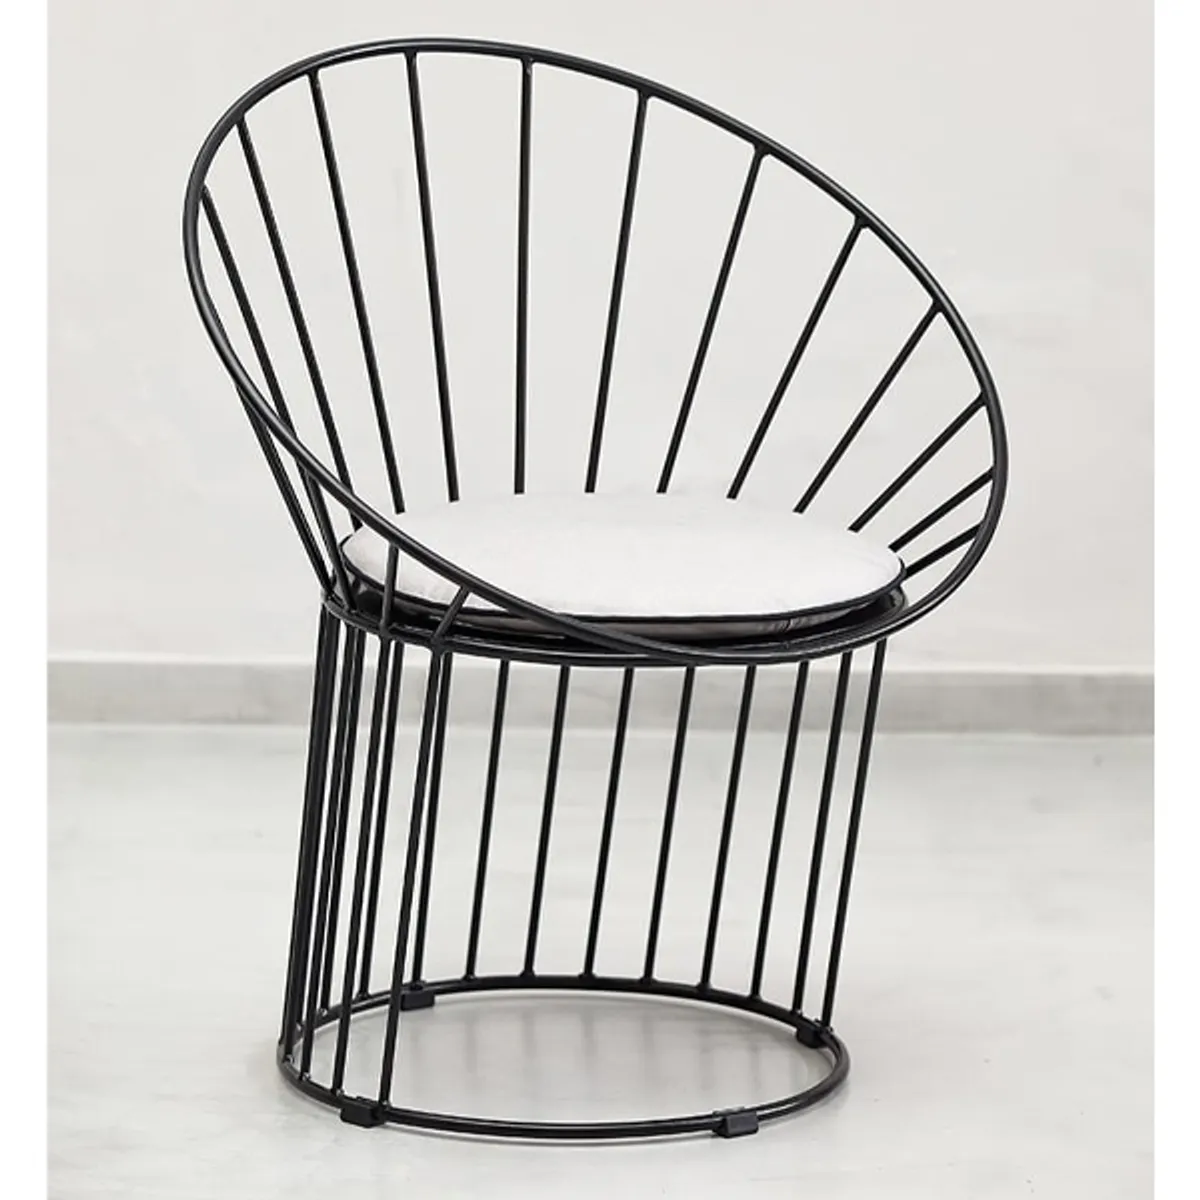 Illume armchair Inside Out Contracts5